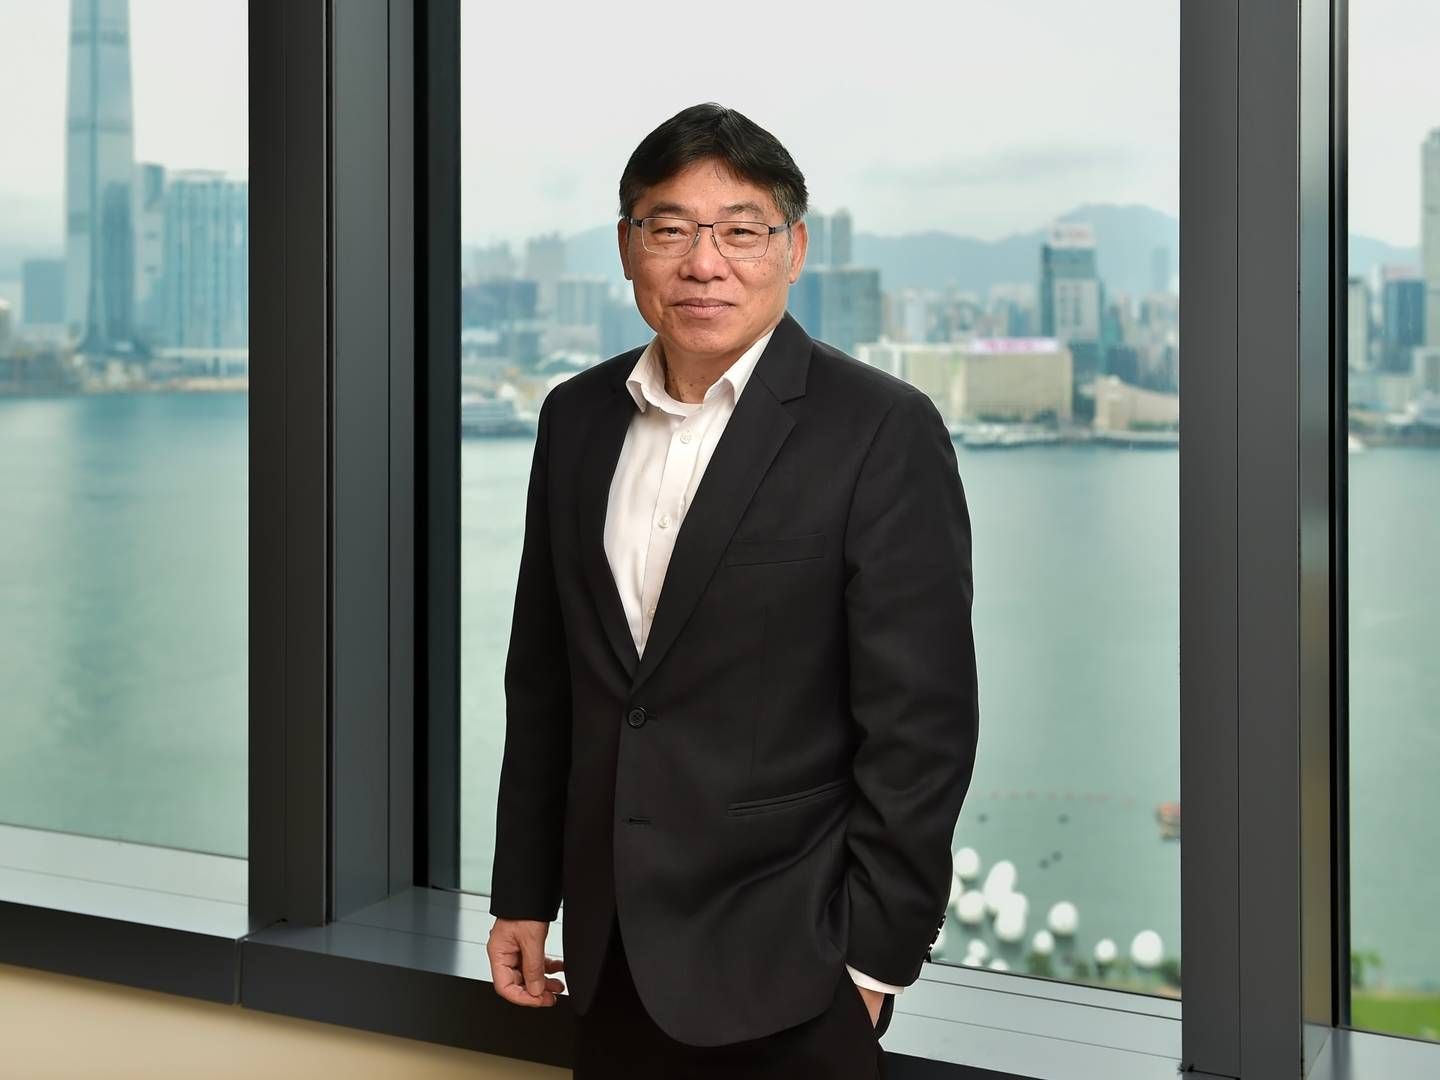 Hong Kong's secretary for transport and logistics, Lam Sai-hung, says the "appropriate body" will approach Maersk to discuss Gemini's network realignment. | Photo: Ali Ghorbani